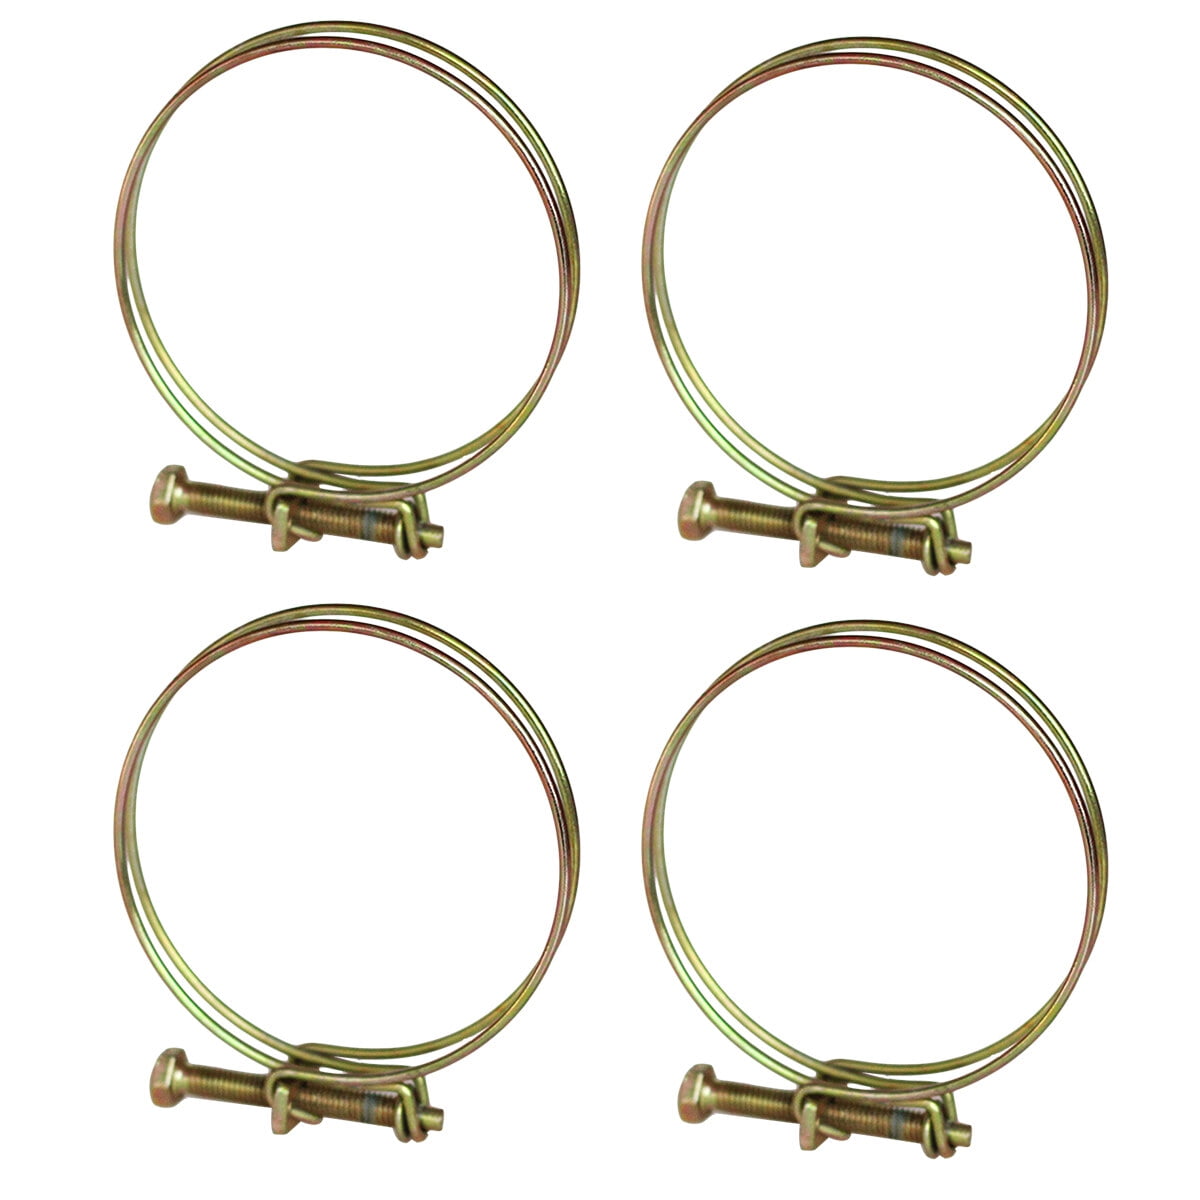 4 Pcs Wire Hose Clamp Adjustable Stainless Steel Pipe Clamp Double Wire ...